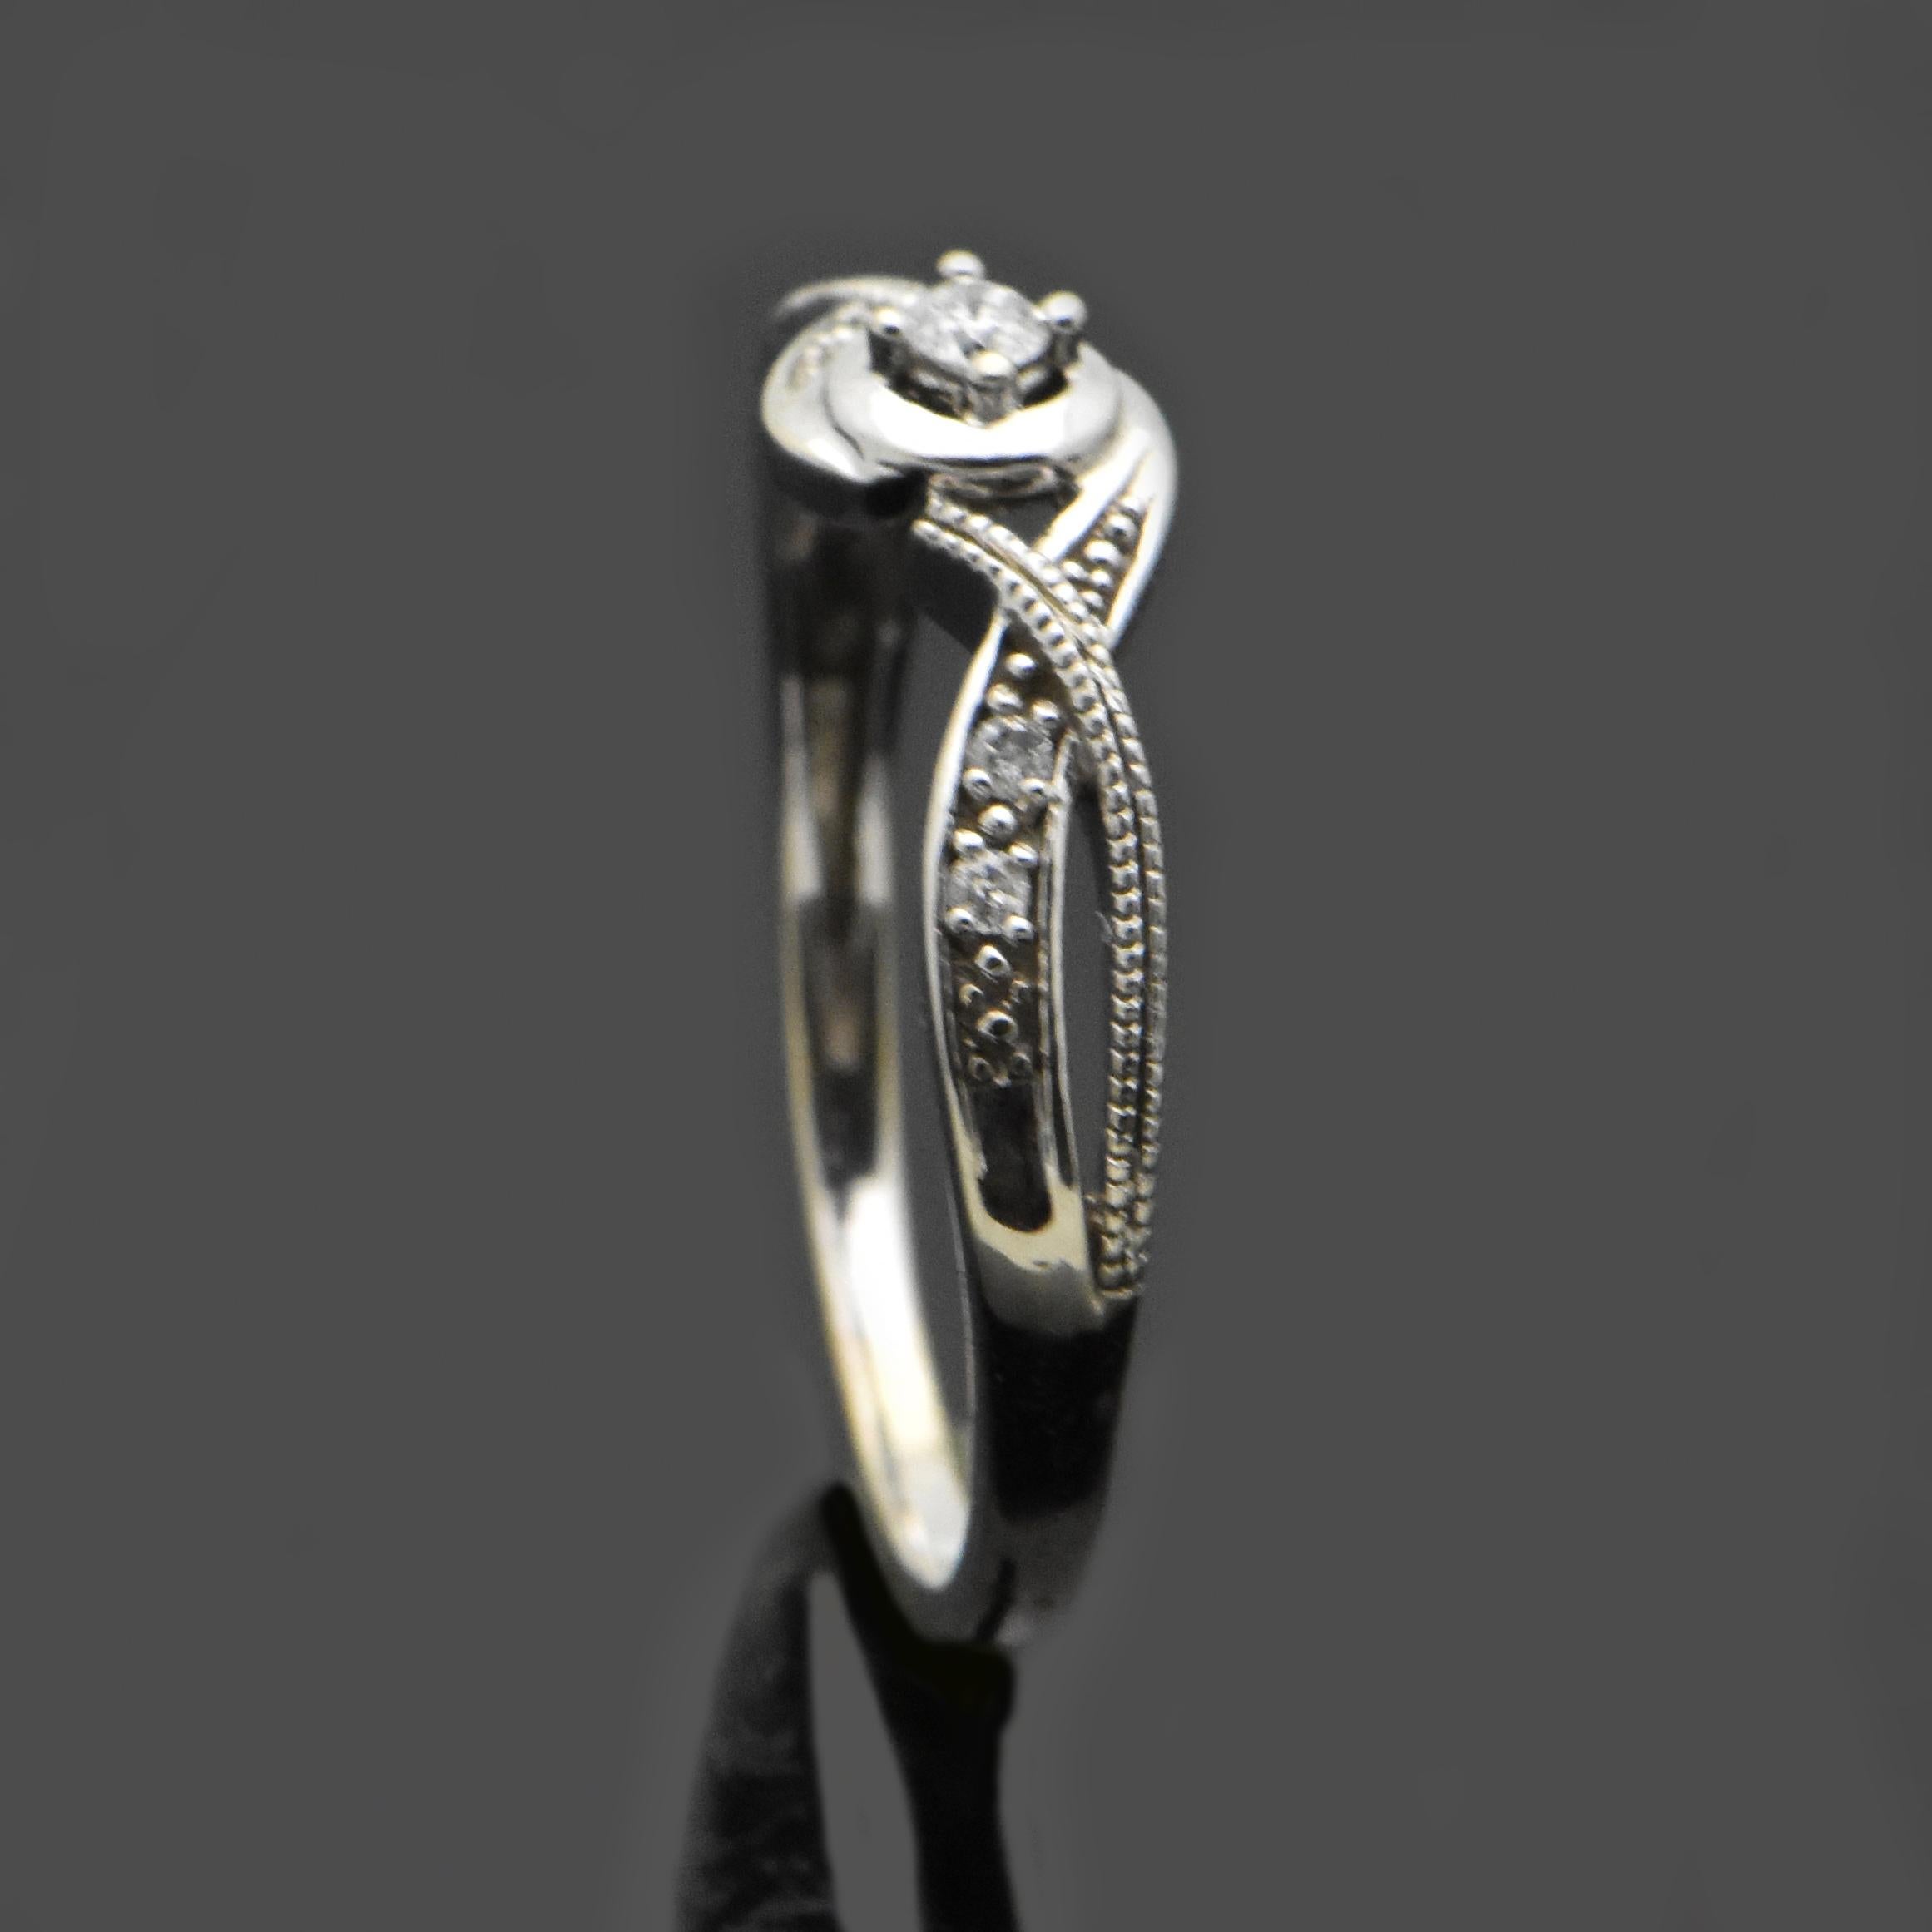 Vintage 14 Karat White Gold Diamonds Ring In Excellent Condition For Sale In Los Angeles, CA